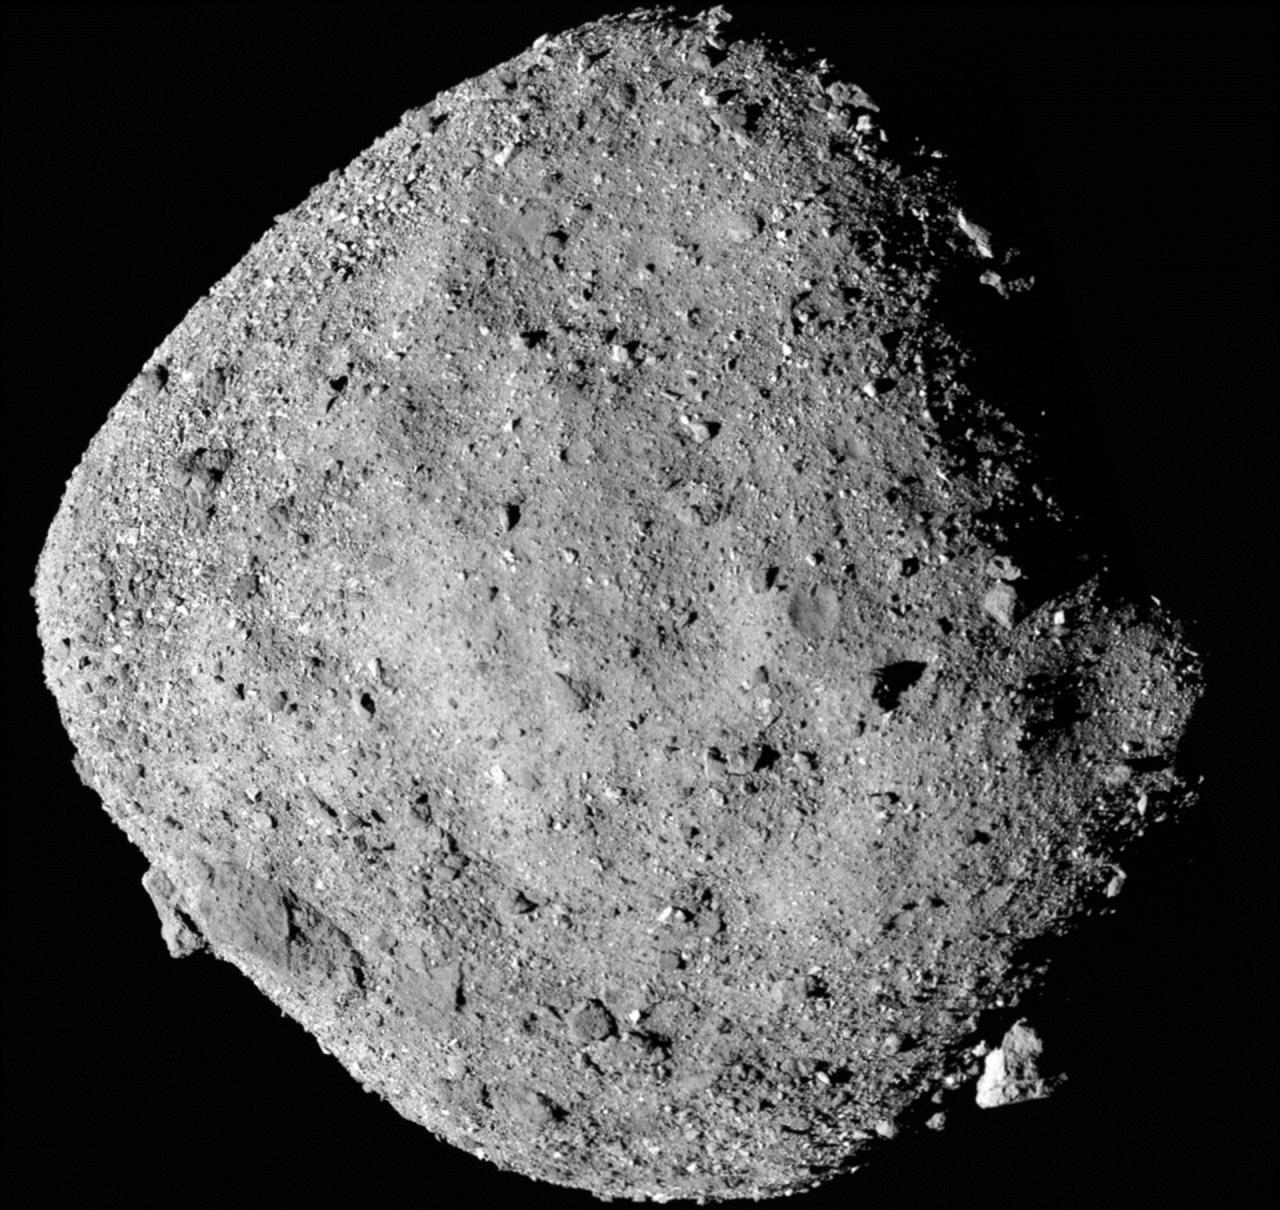 Mosaic image of asteroid Bennu composed of 12 PolyCam images collected on December 2, 2018 by the OSIRIS-REx spacecraft from a distance of 24 km. Credit: NASA/Goddard/University of Arizona.